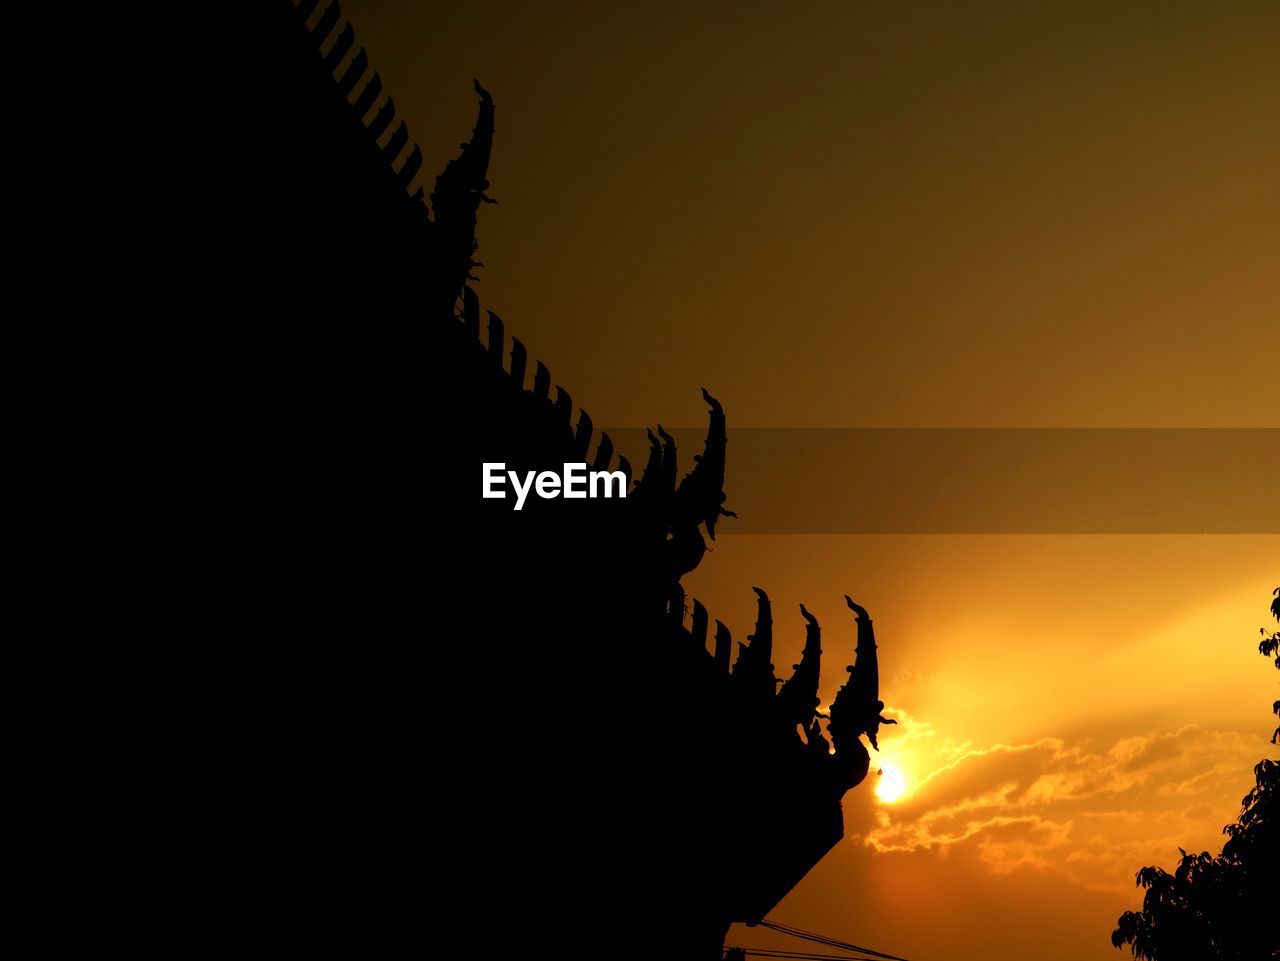 Low angle view of silhouette temple against sky during sunset